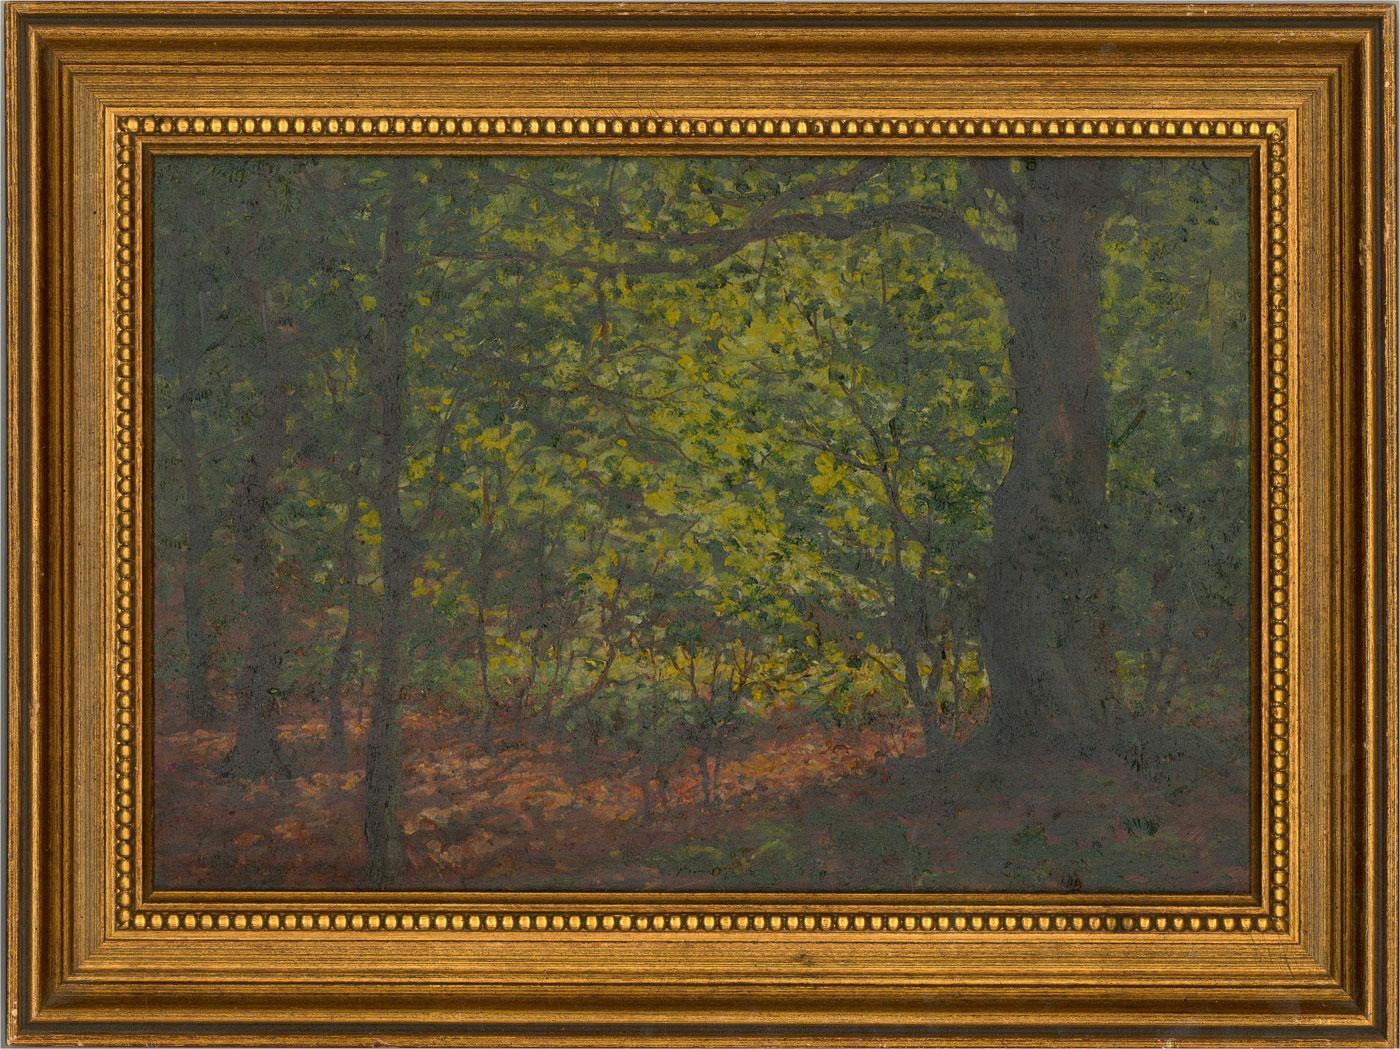 A vibrant impressionistic oil painting of lush trees in spring with fallen leaves carpeting the forest floor. Presented in a distressed gilt-effect wooden frame. Signed to the lower-left edge. On board.
